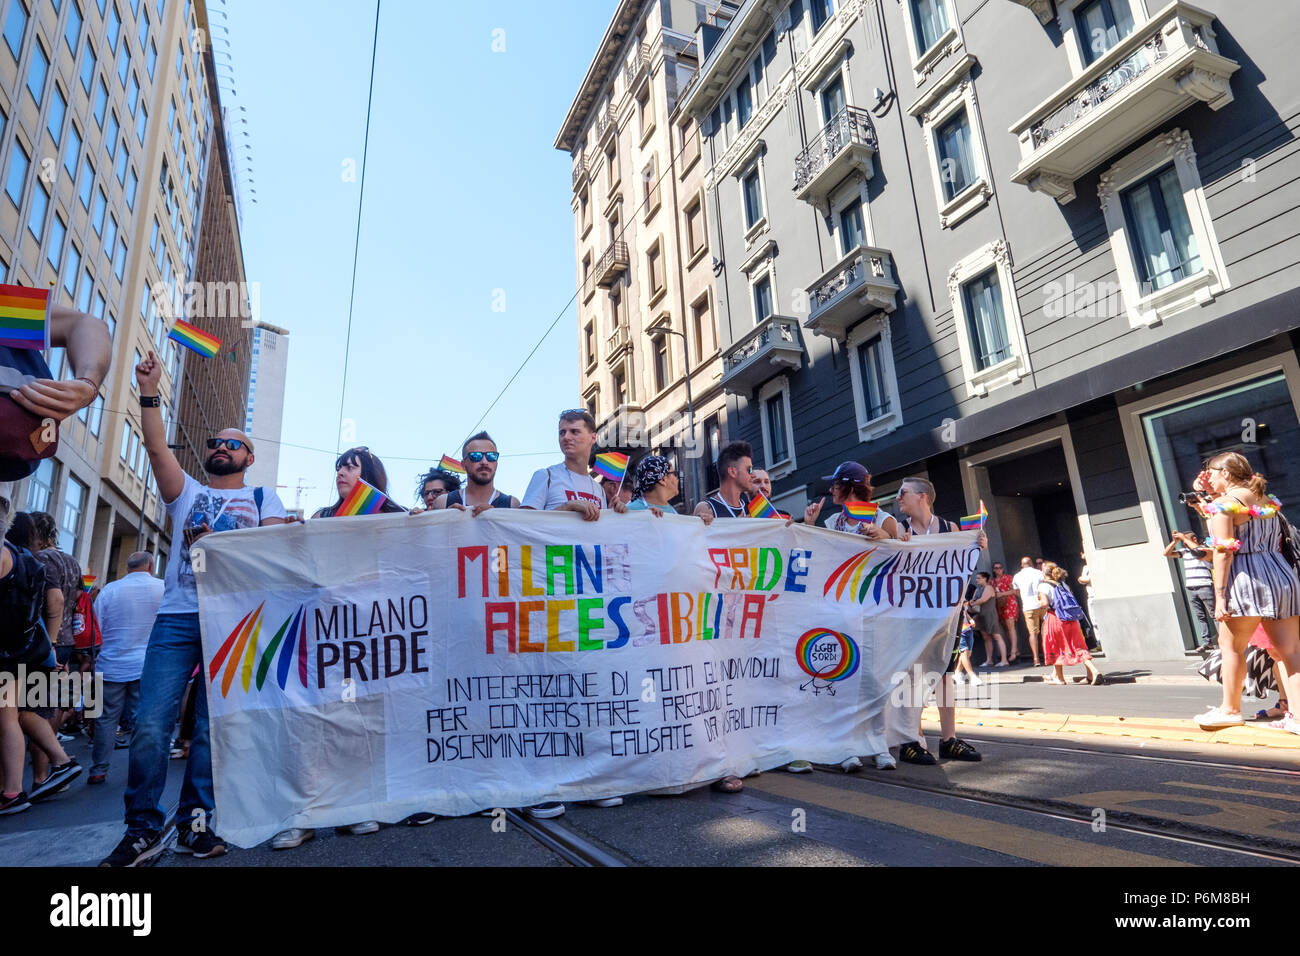 Milan, Italy. 30th Jun, 2018. Milano Pride 2018, manifestation of gay, lesbians, asexuals, bisexuals, intersexual and queer pride. People holding a band during the start of the parade. Milan, Italy. June 30, 2018. Credit: Gentian Polovina/Alamy Live News Stock Photo